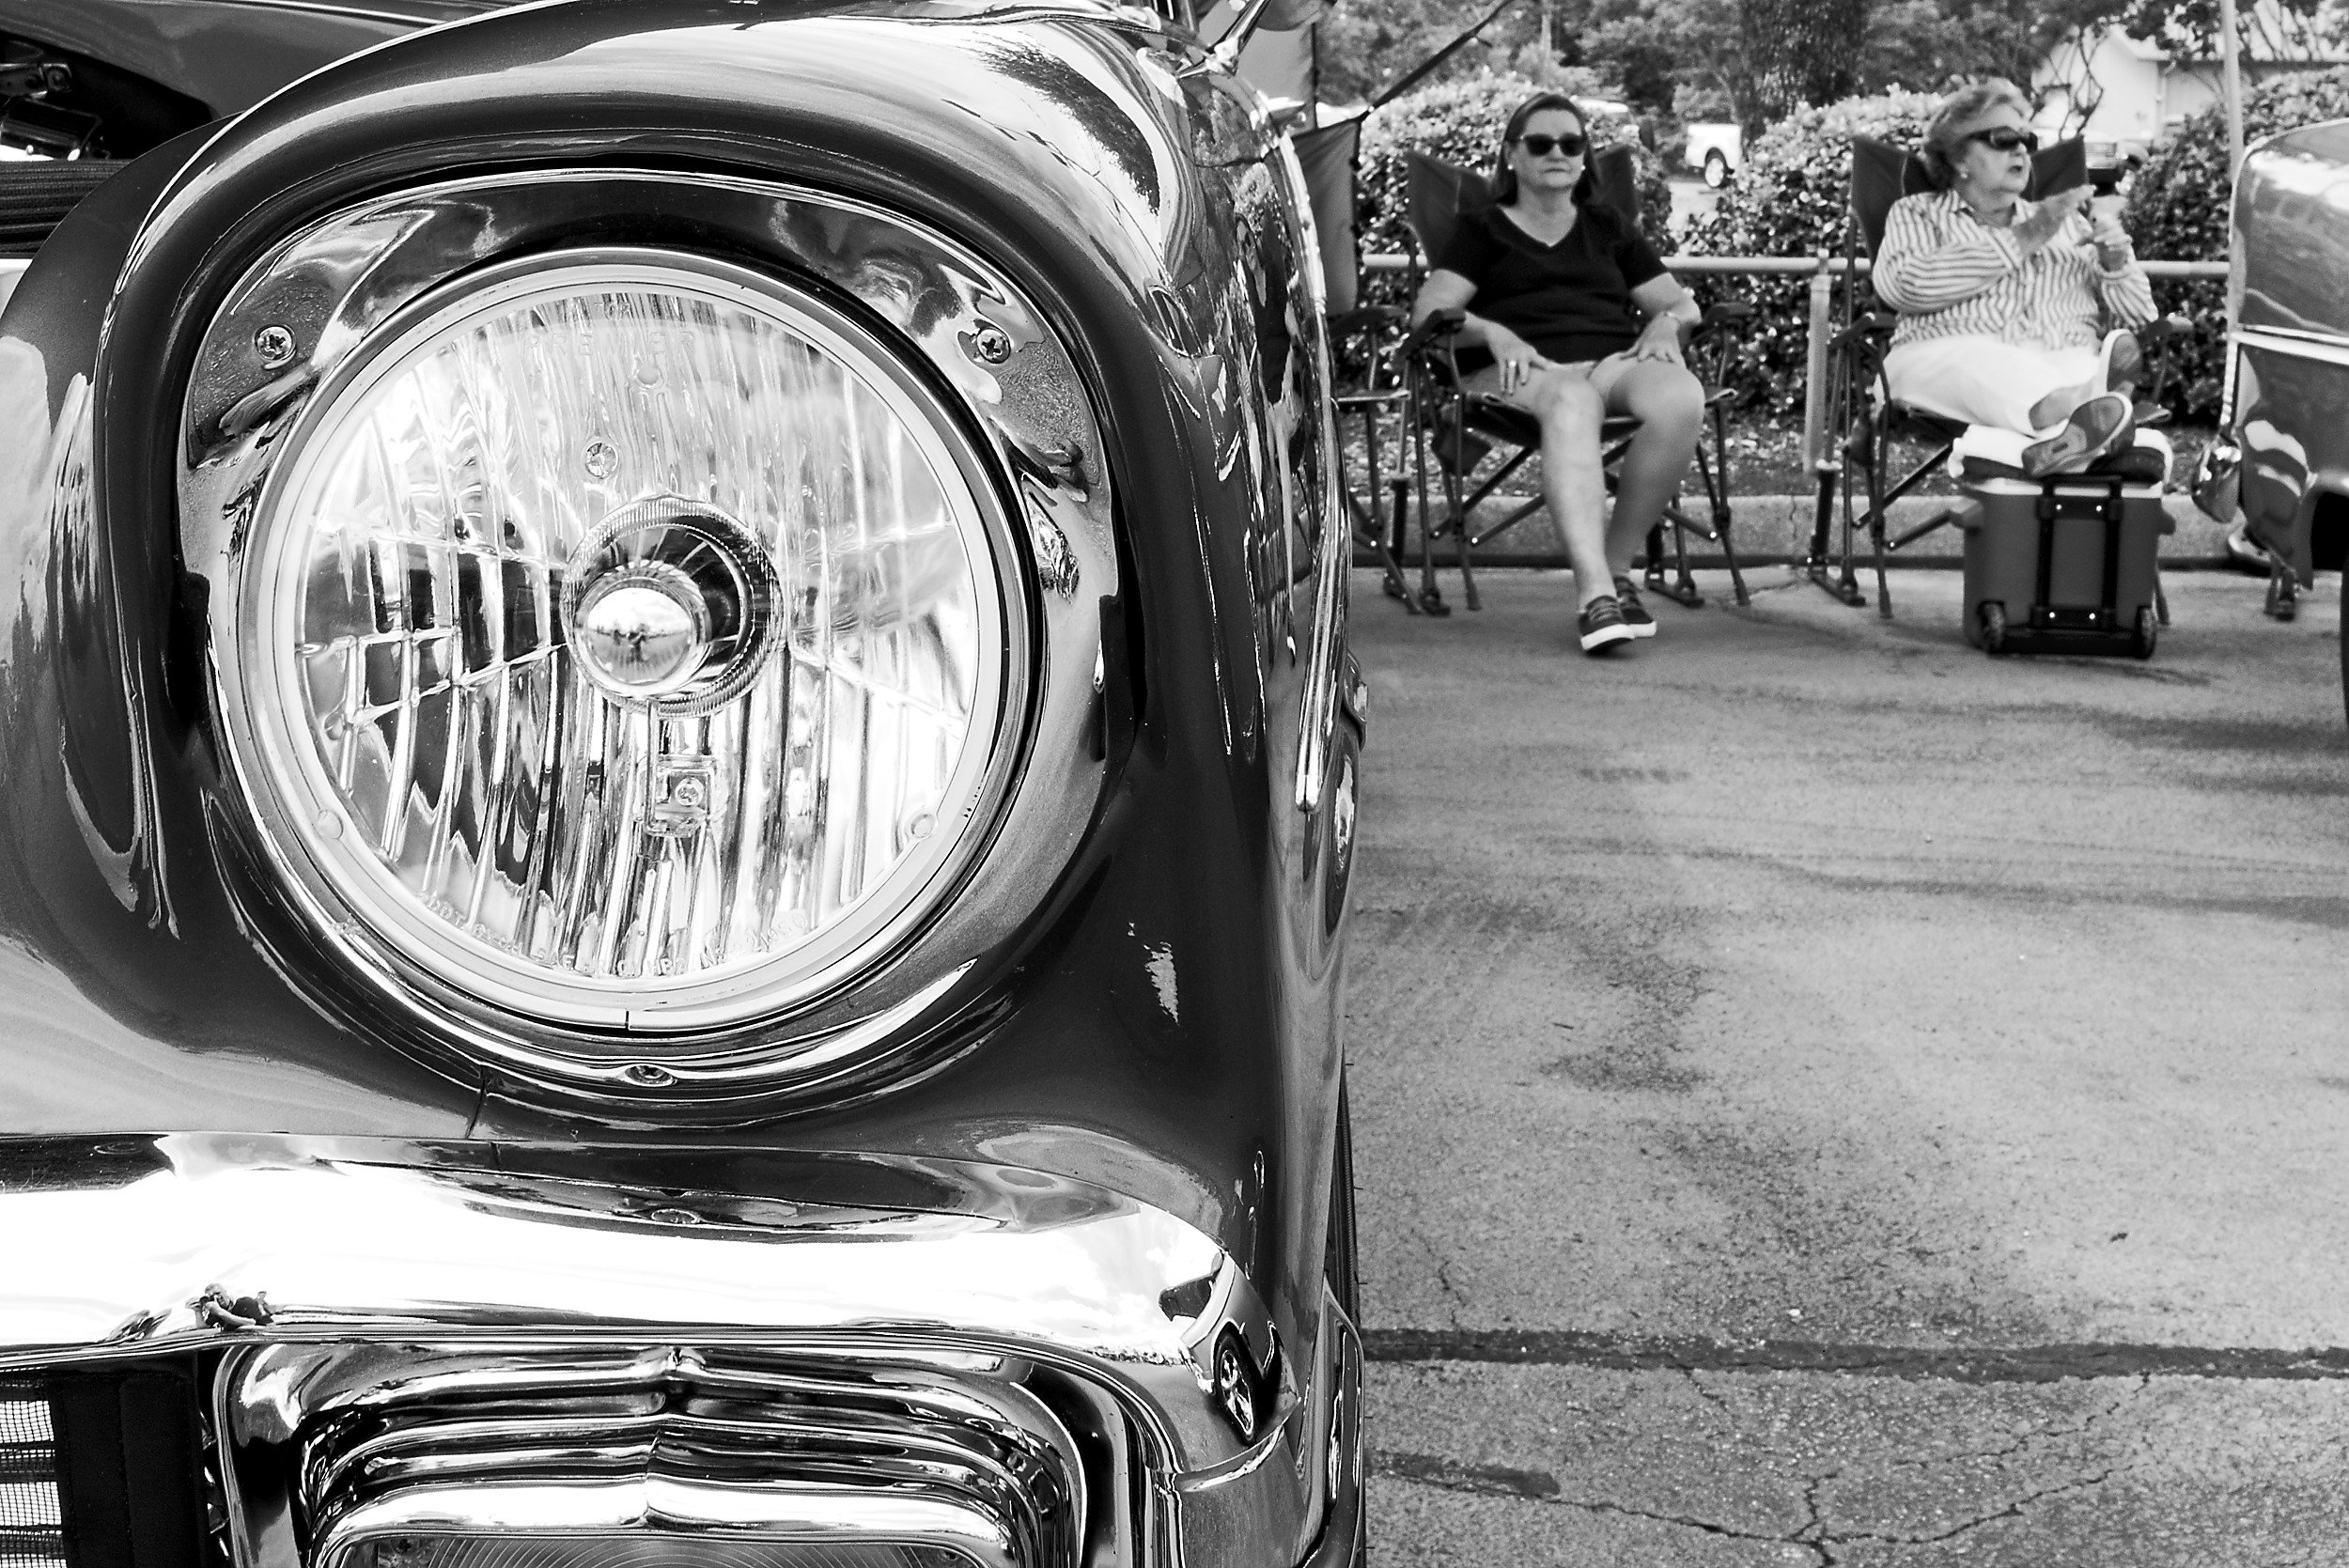  black and white close up image of the light of a vintage car with two women sitting in the background 